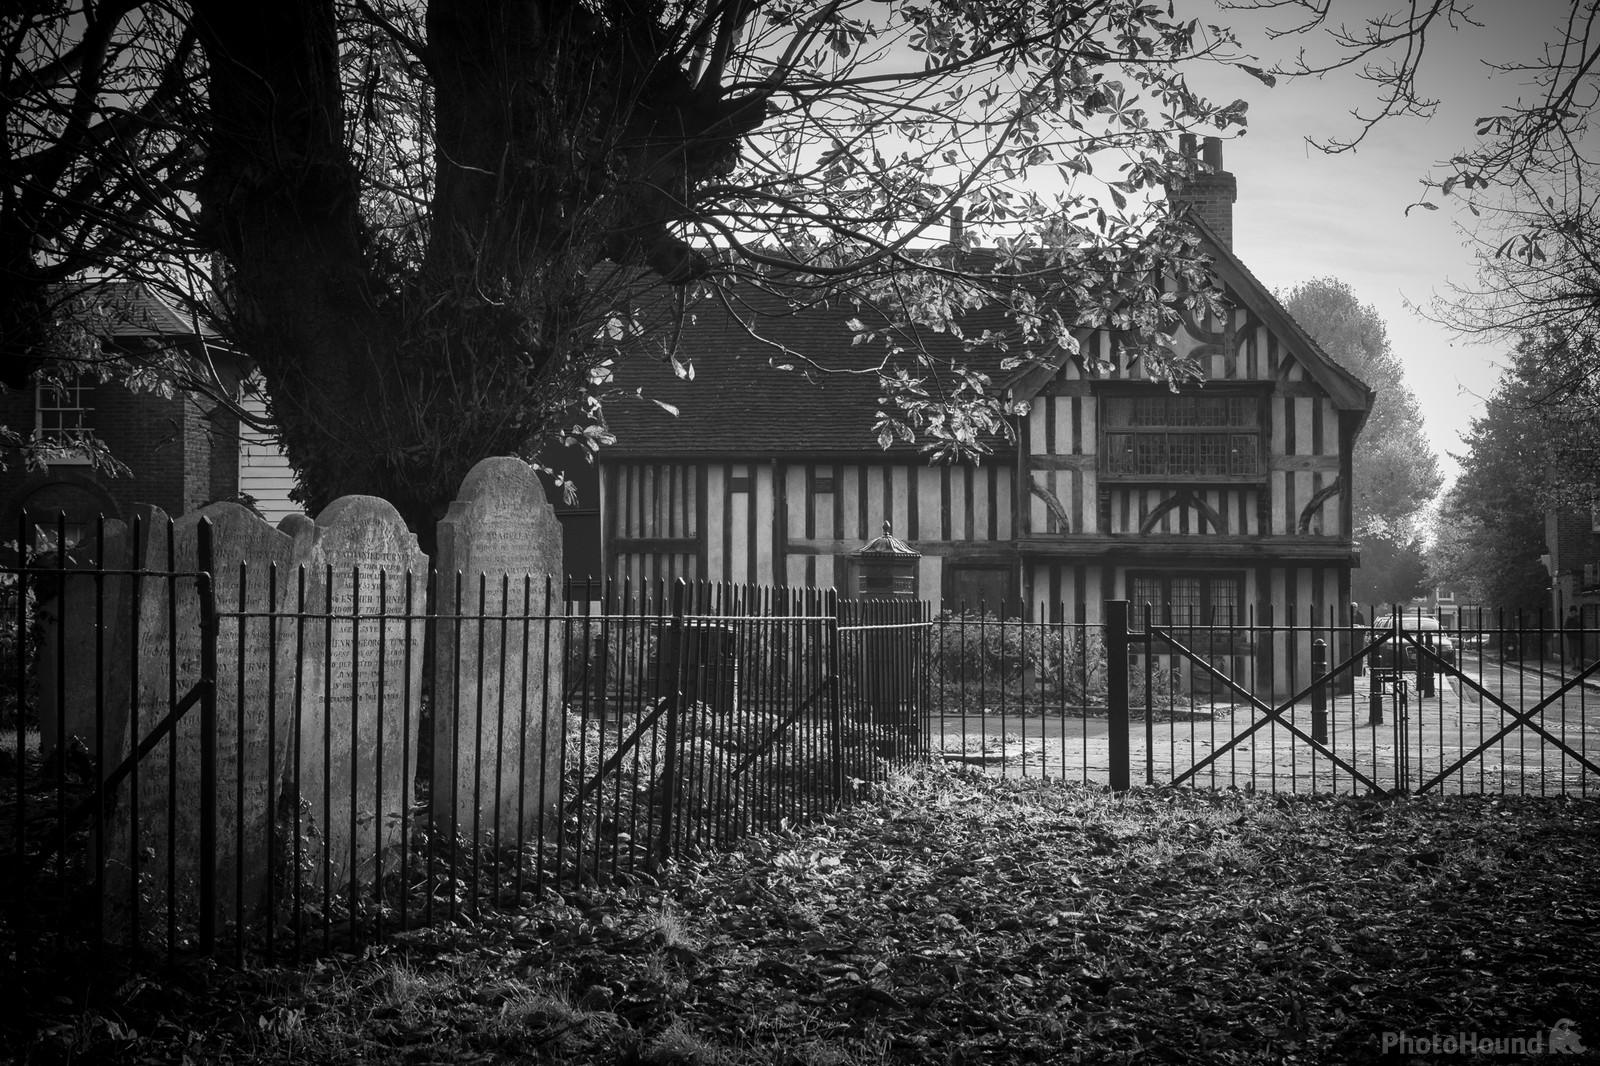 Image of The Ancient House, Walthamstow Village by Mathew Browne